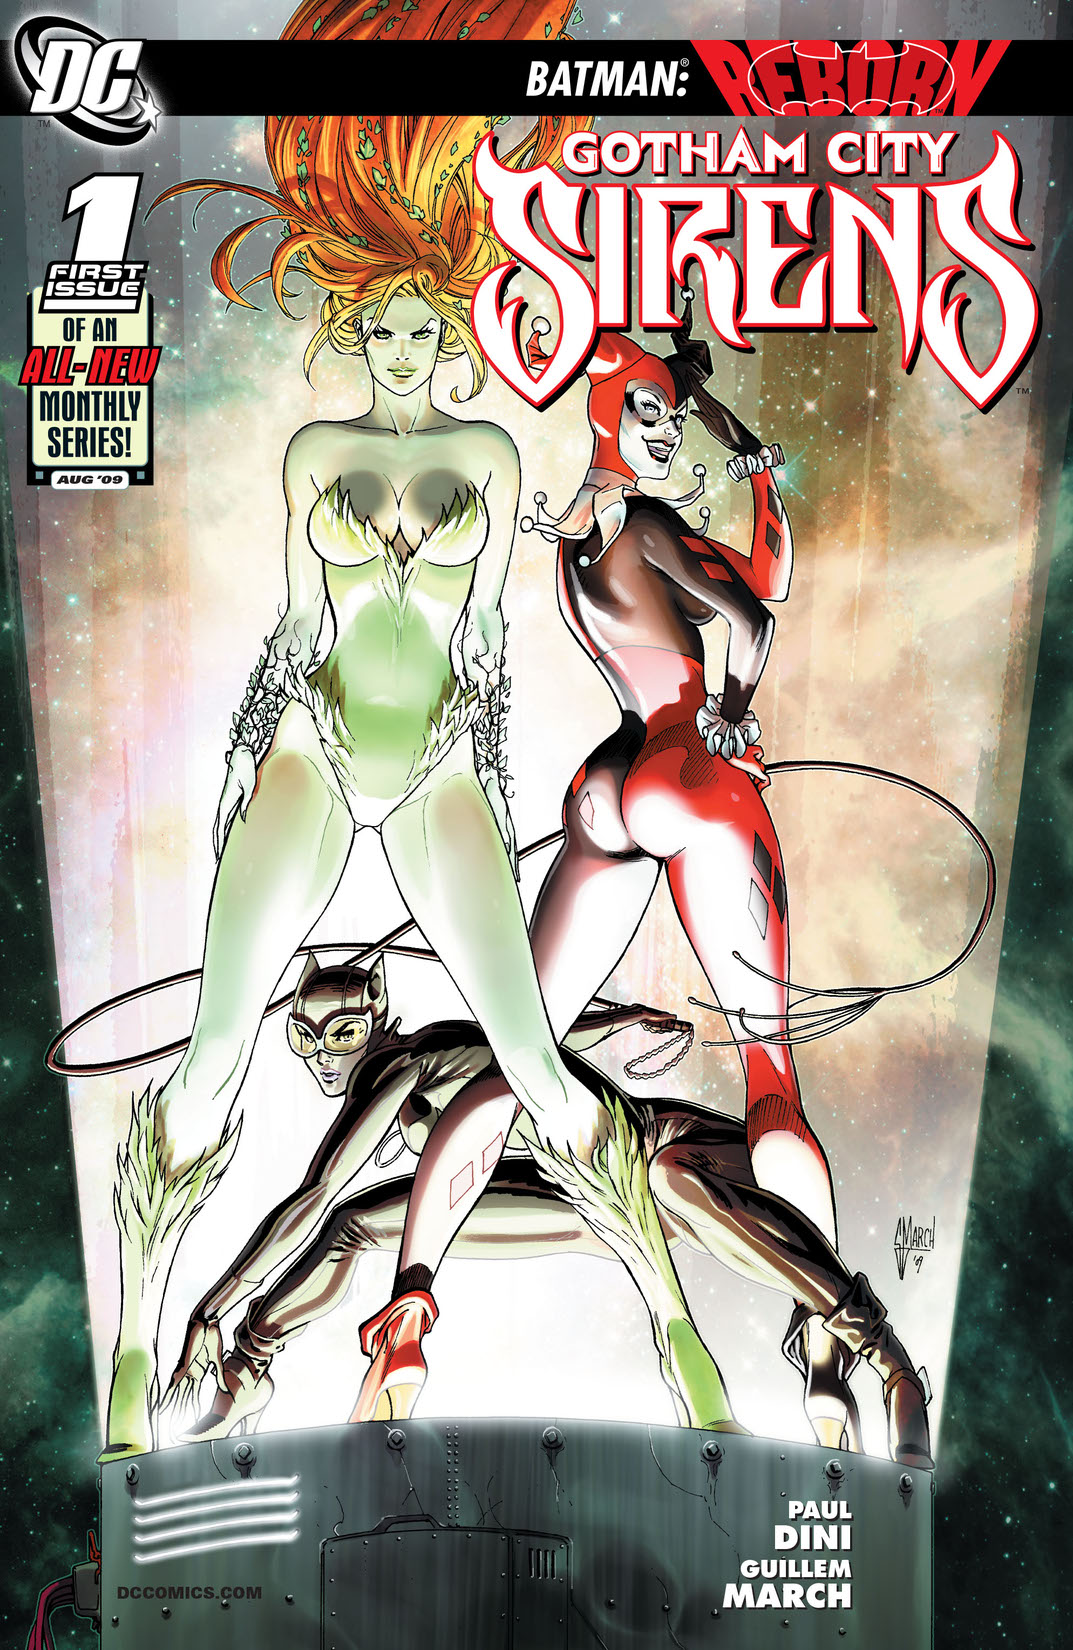 Gotham City Sirens #1 preview images